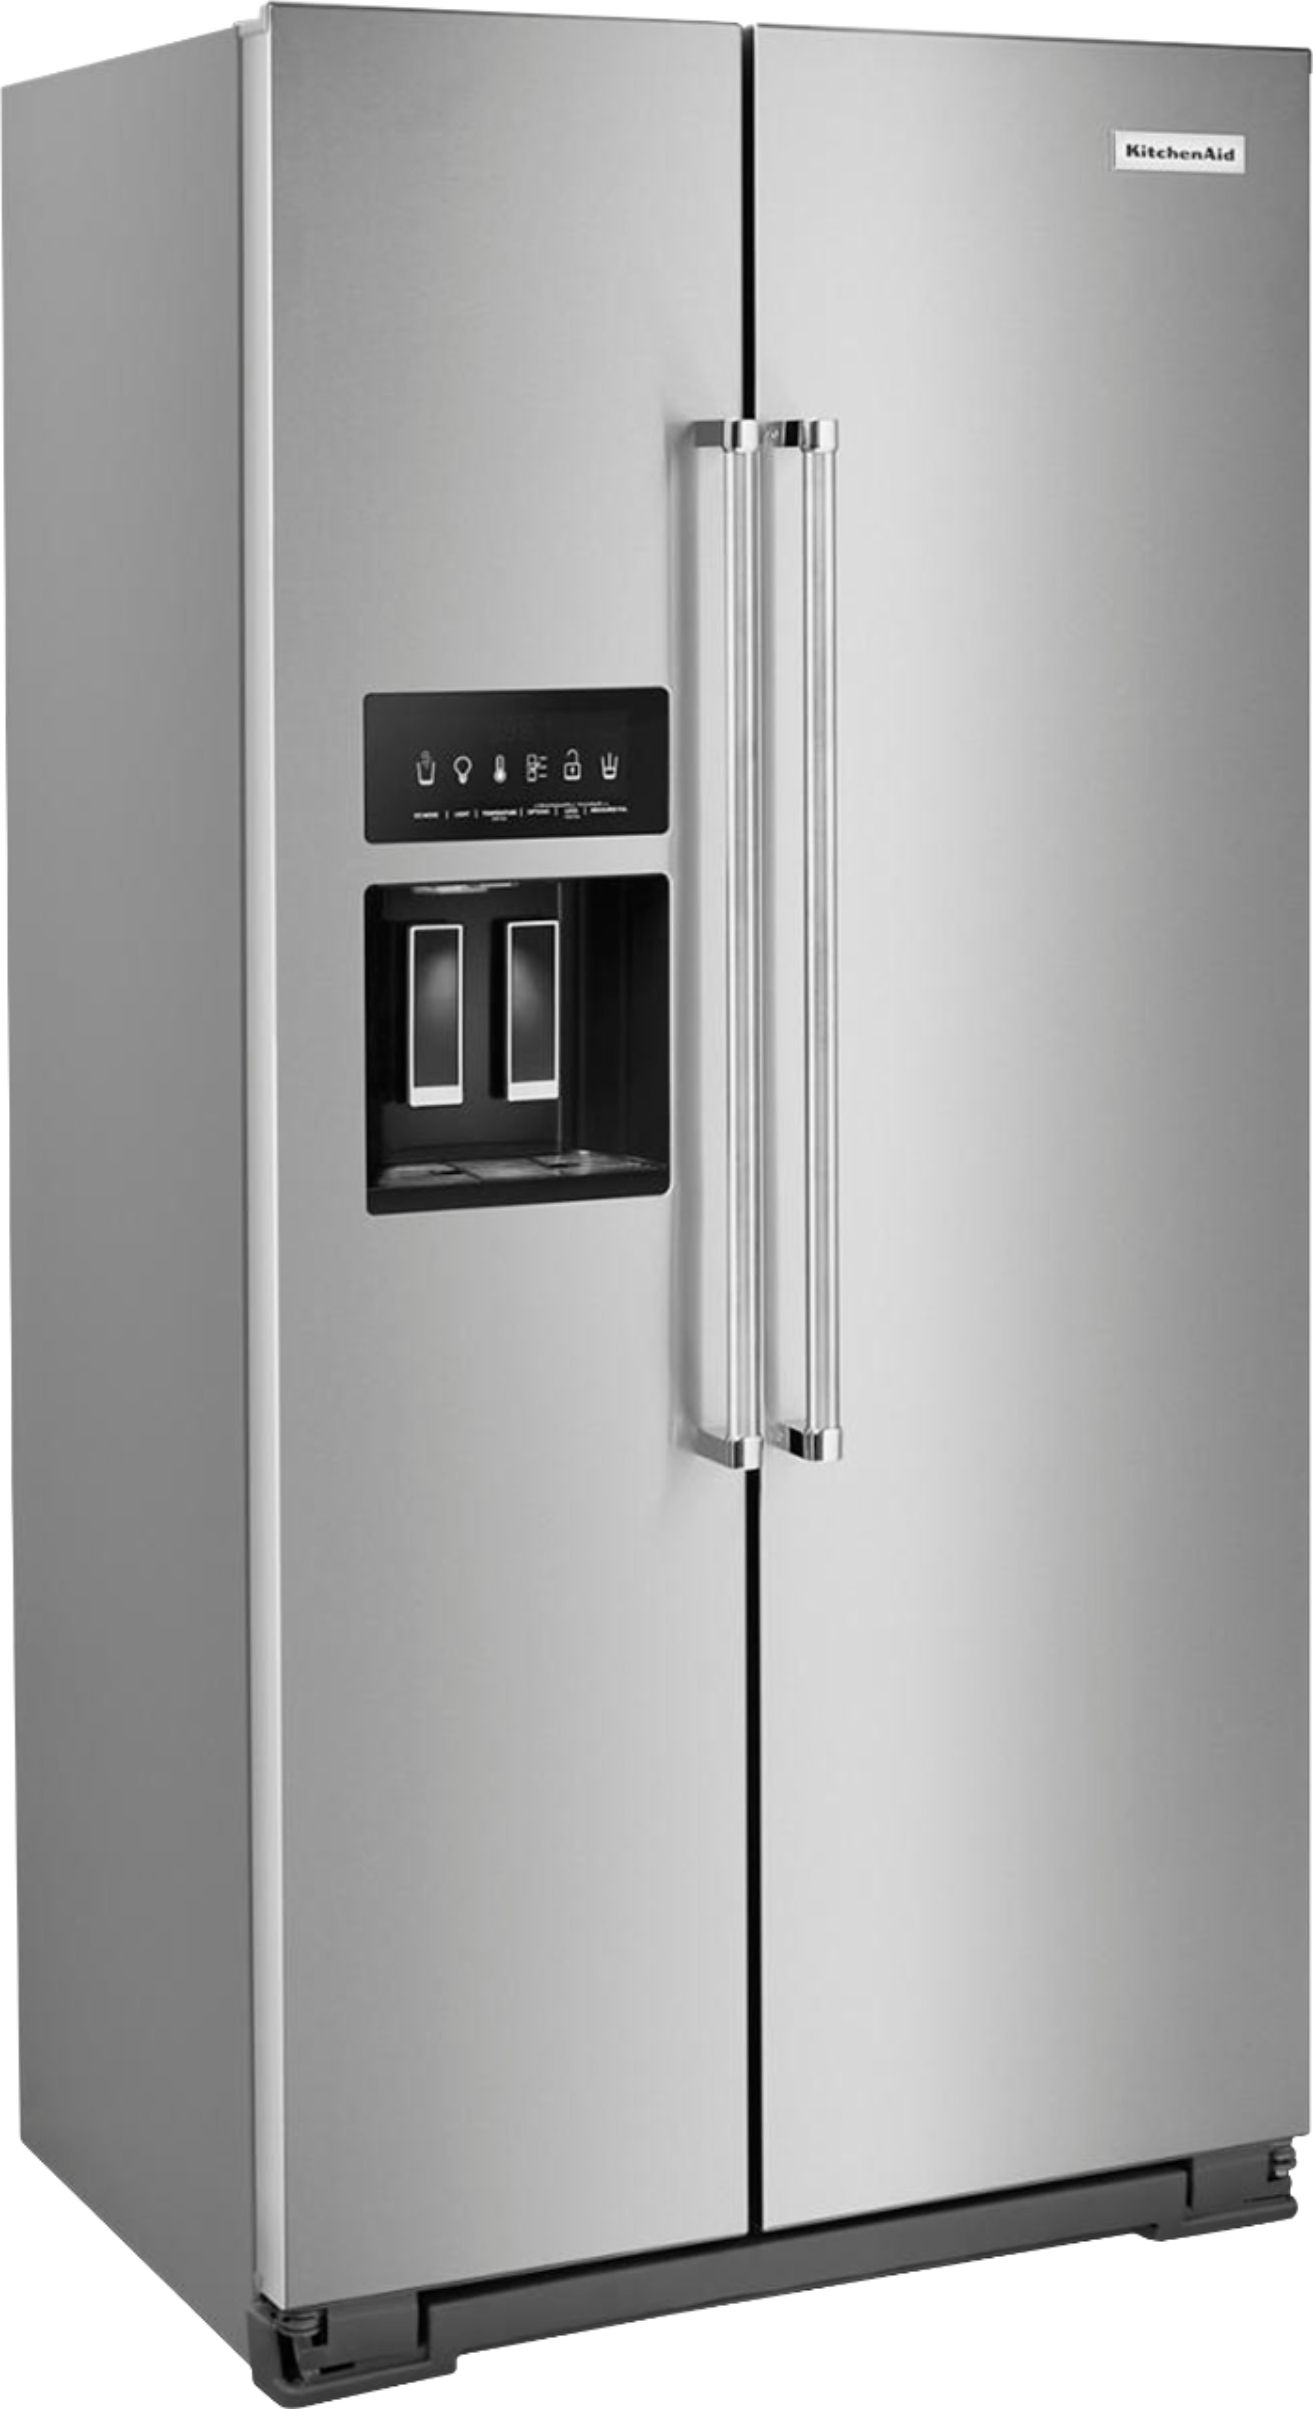 Angle View: KitchenAid - 22.6 Cu. Ft. Side-by-Side Counter-Depth Refrigerator - Stainless Steel